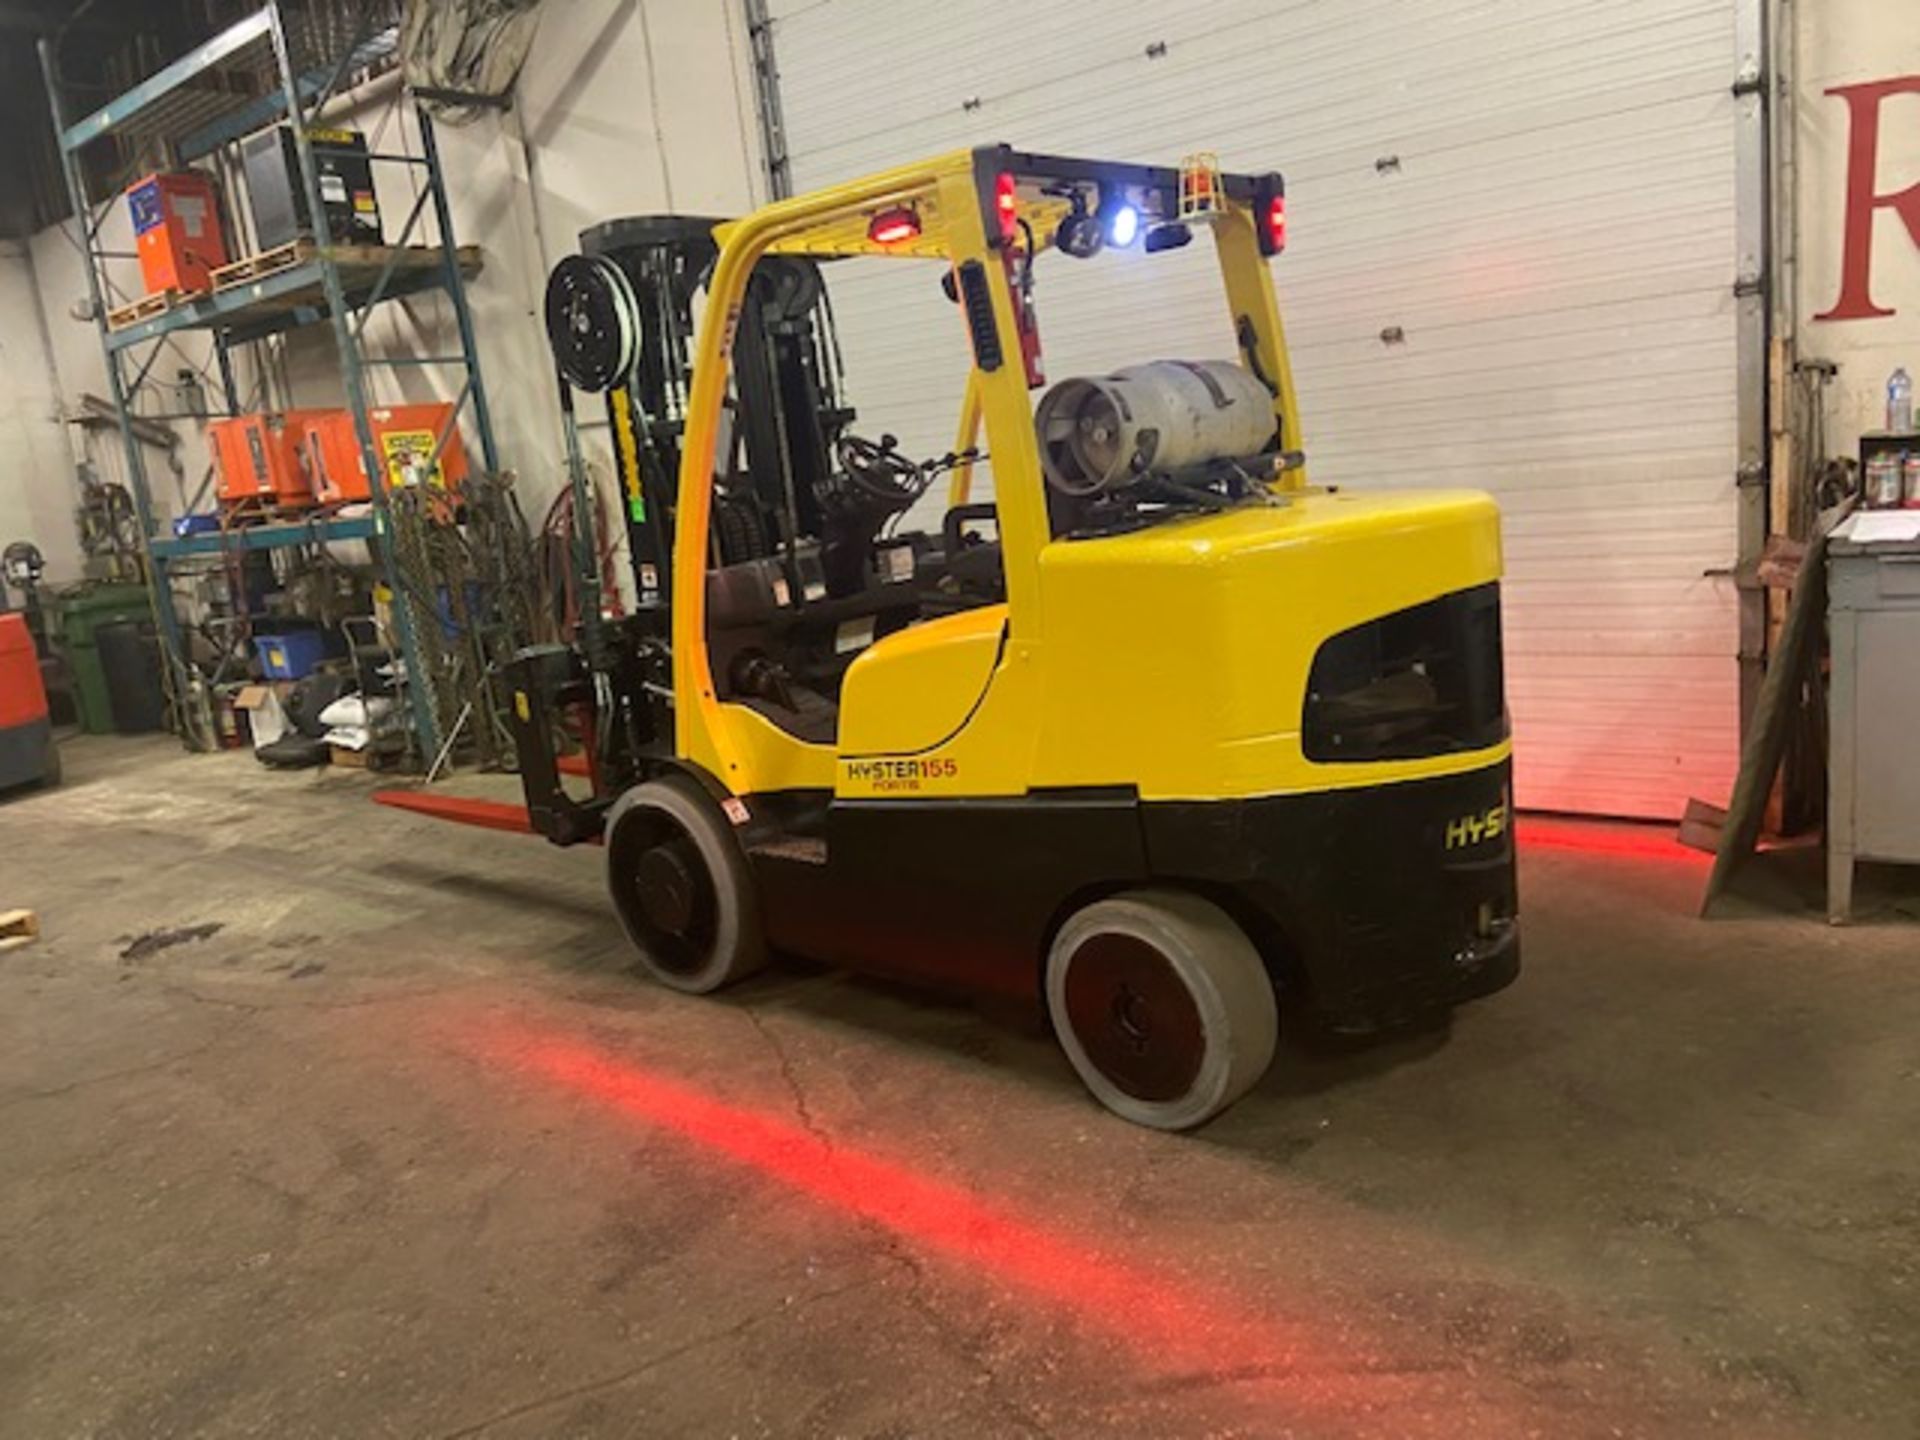 FREE CUSTOMS - MINT 2016 Hyster 15,500lbs Capacity Forklift S155FT LPG (propane) with sideshift w FP - Image 4 of 4